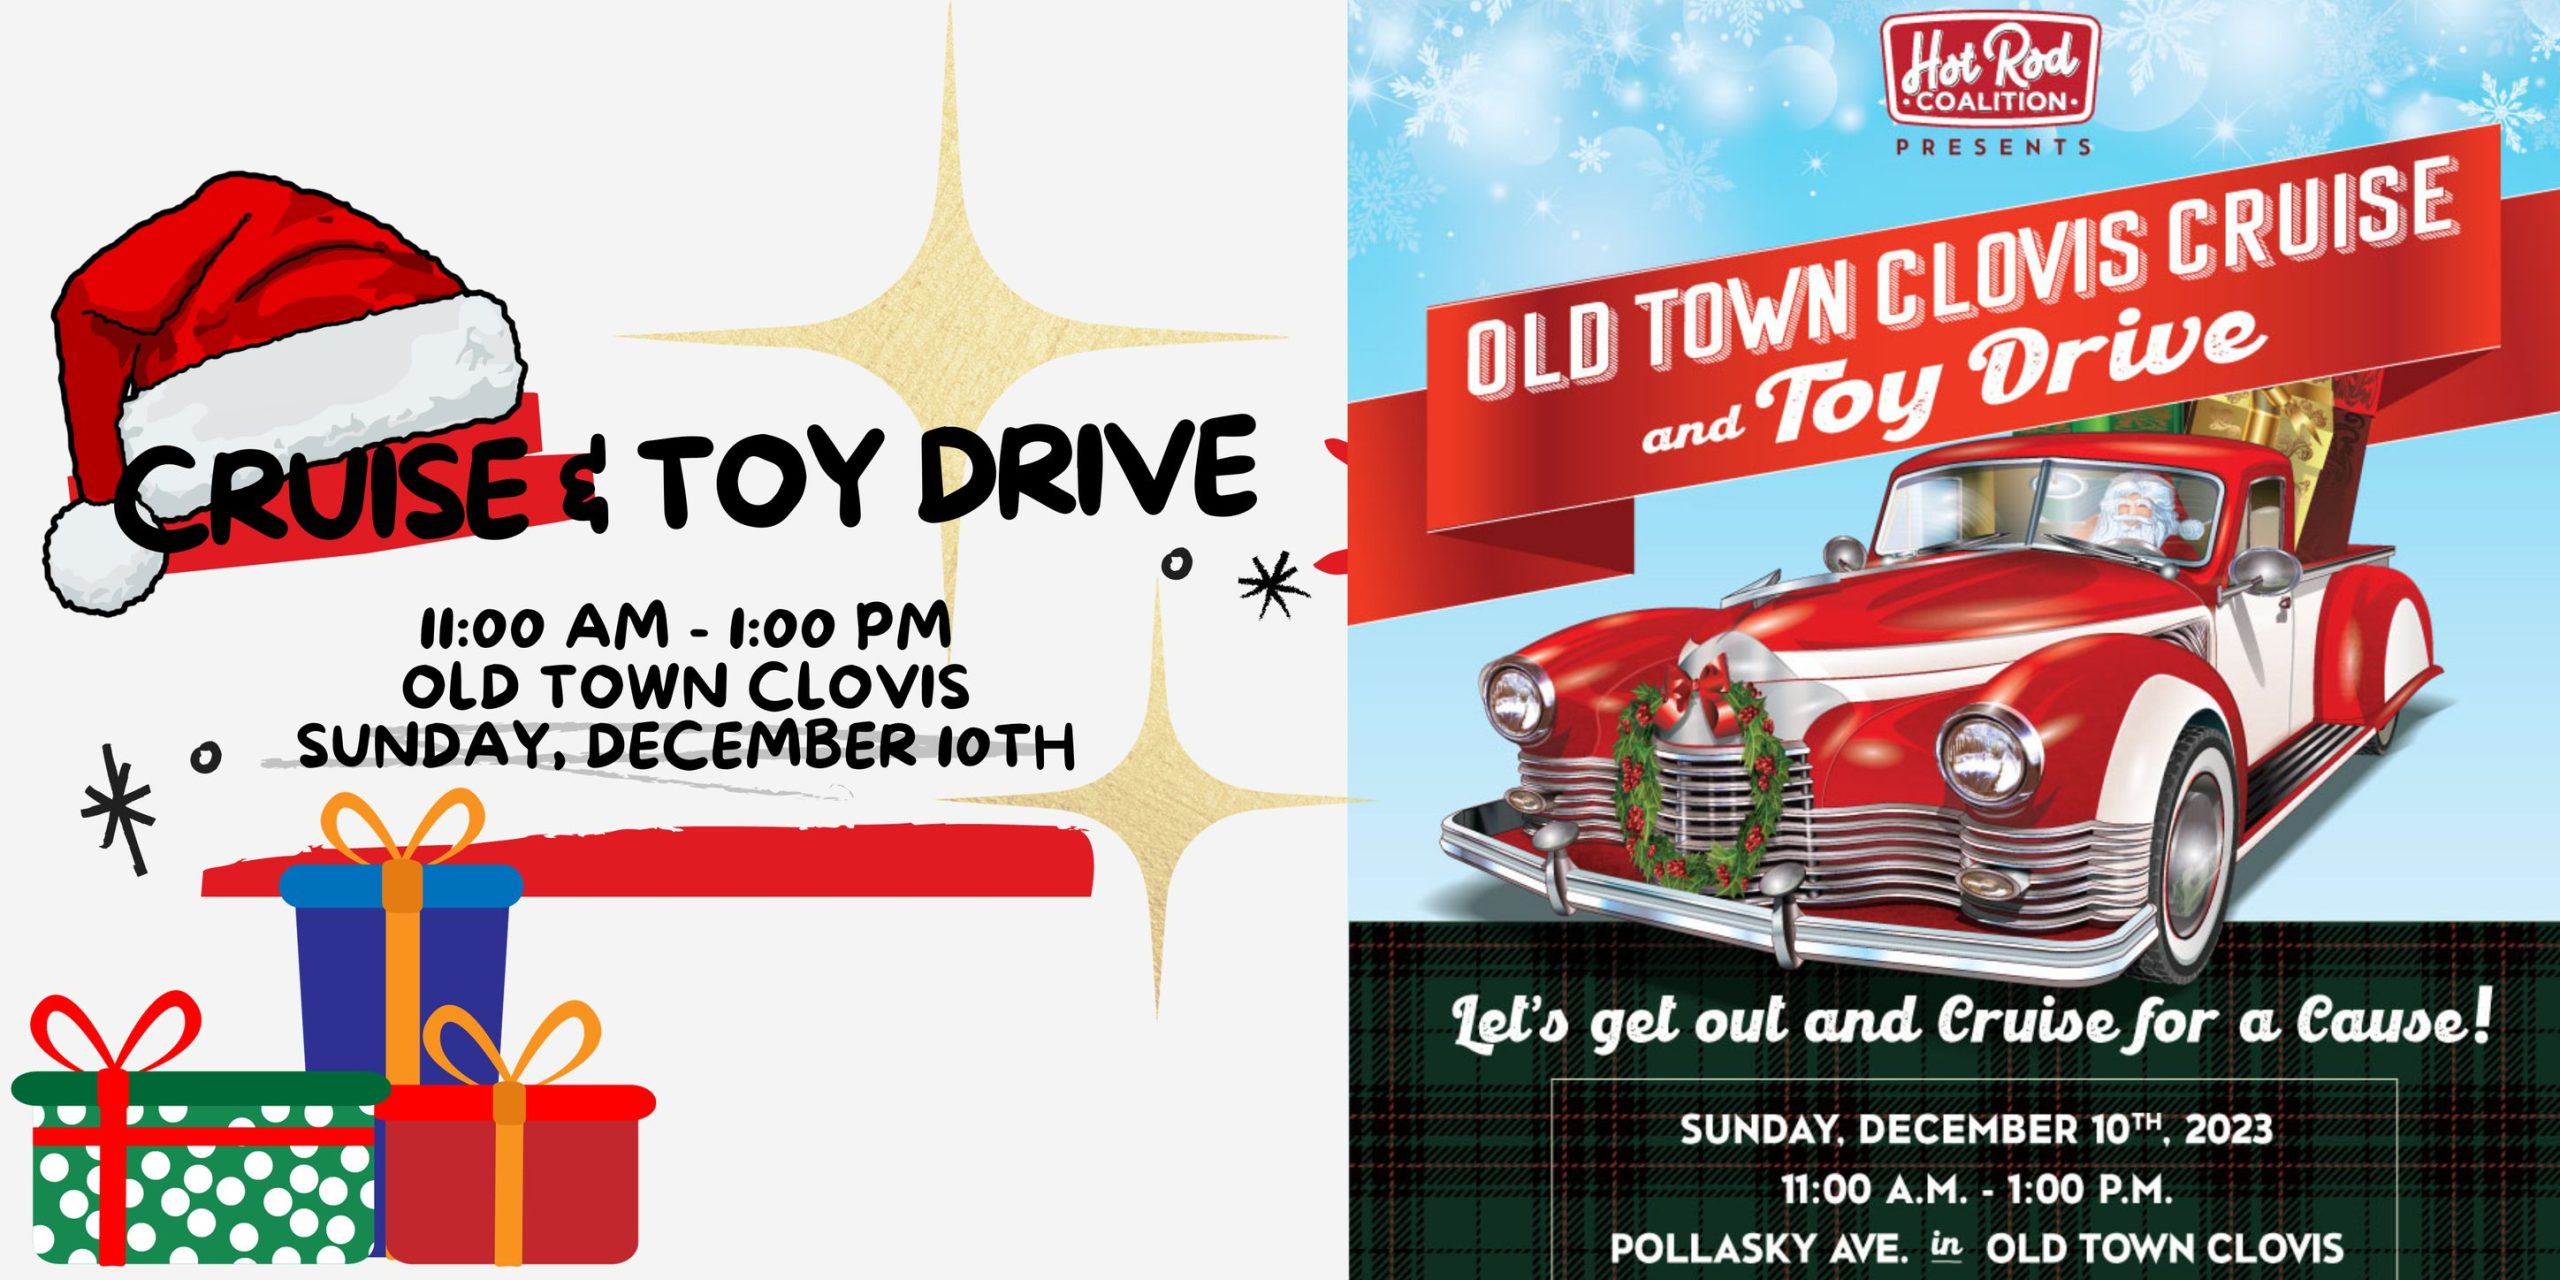 Old Town Clovis Cruise and Toy Drive